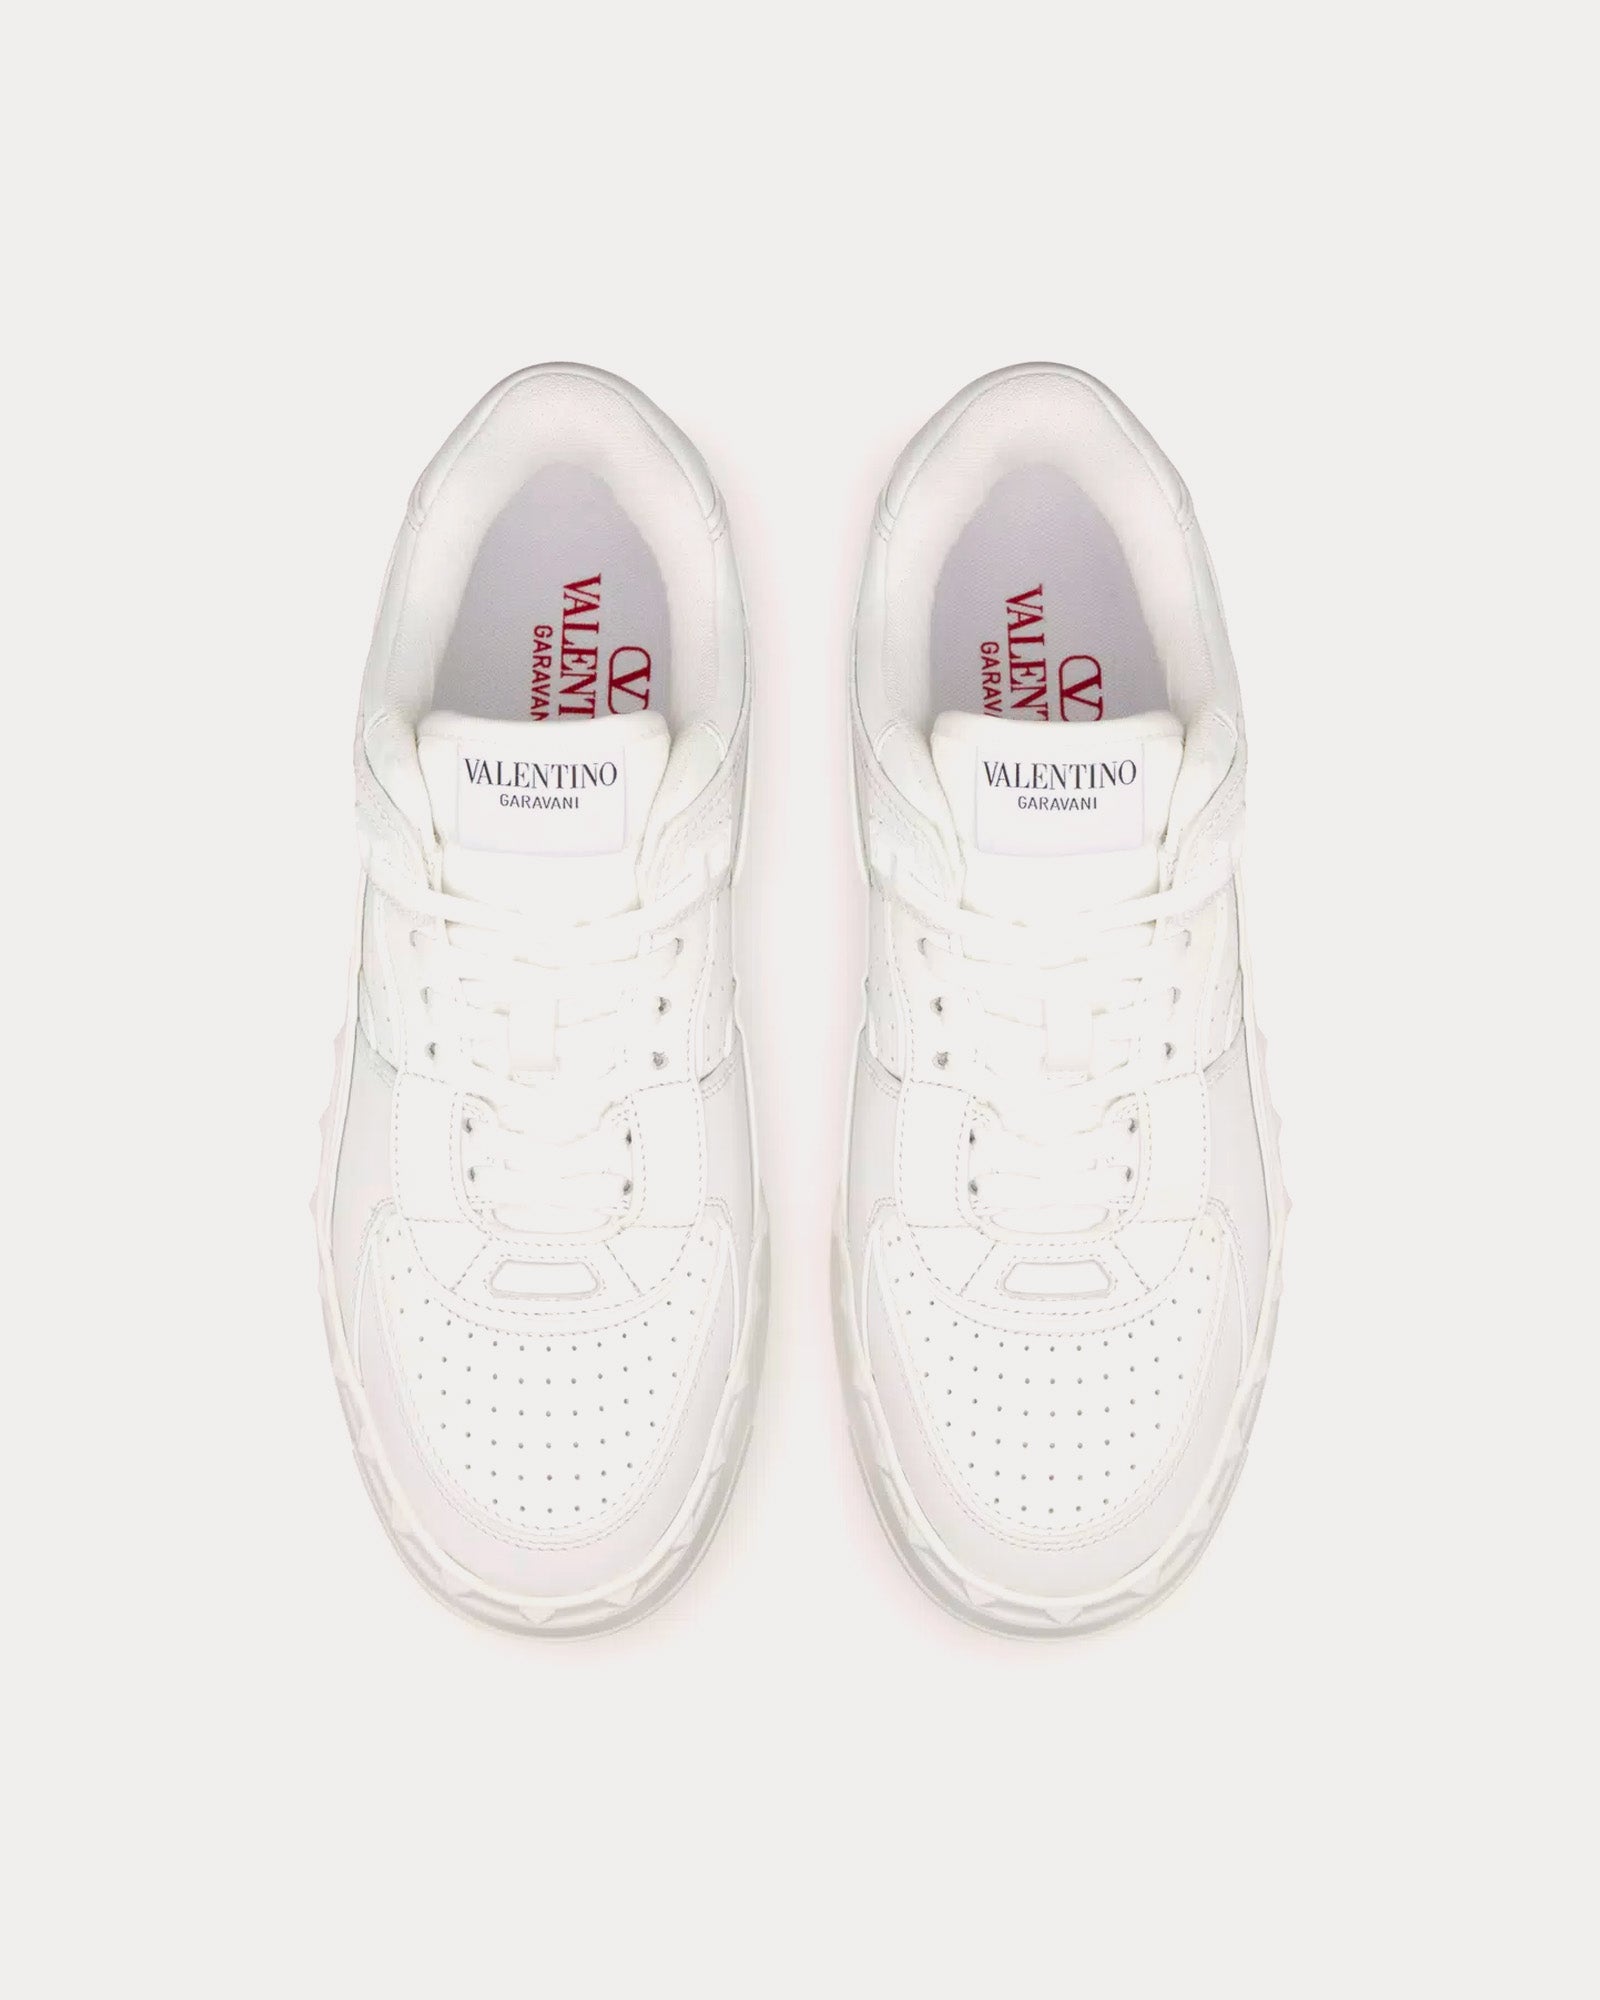 Valentino - Freedots XL Calfskin Leather White Low Top Sneakers